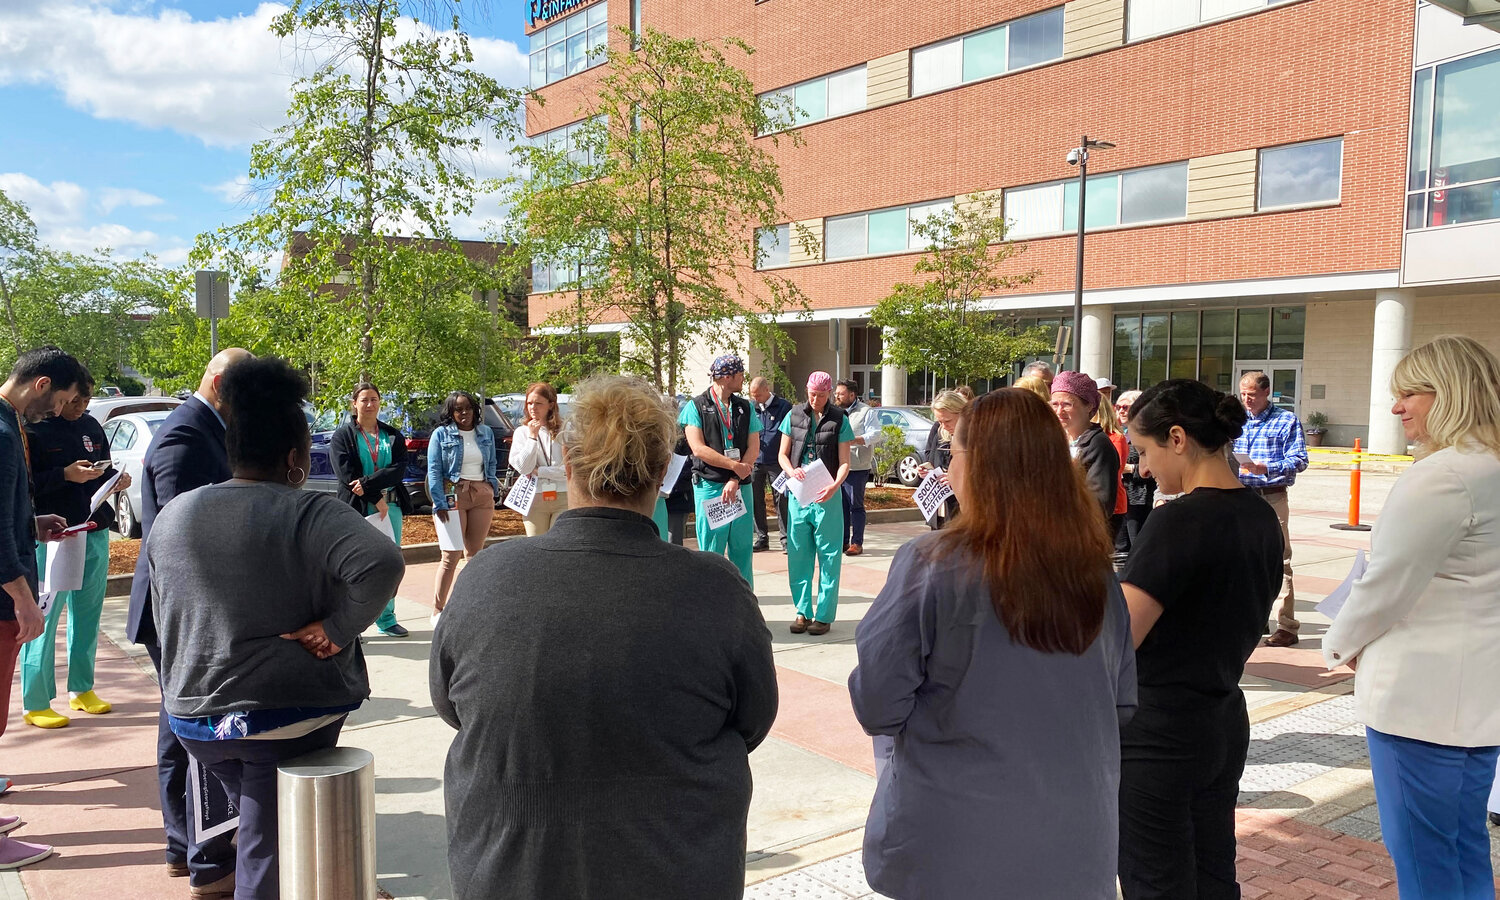 A gathering at the entrance at Women & Infants Hospital on Thursday morning, May 25, commemorating the death of George Floyd.